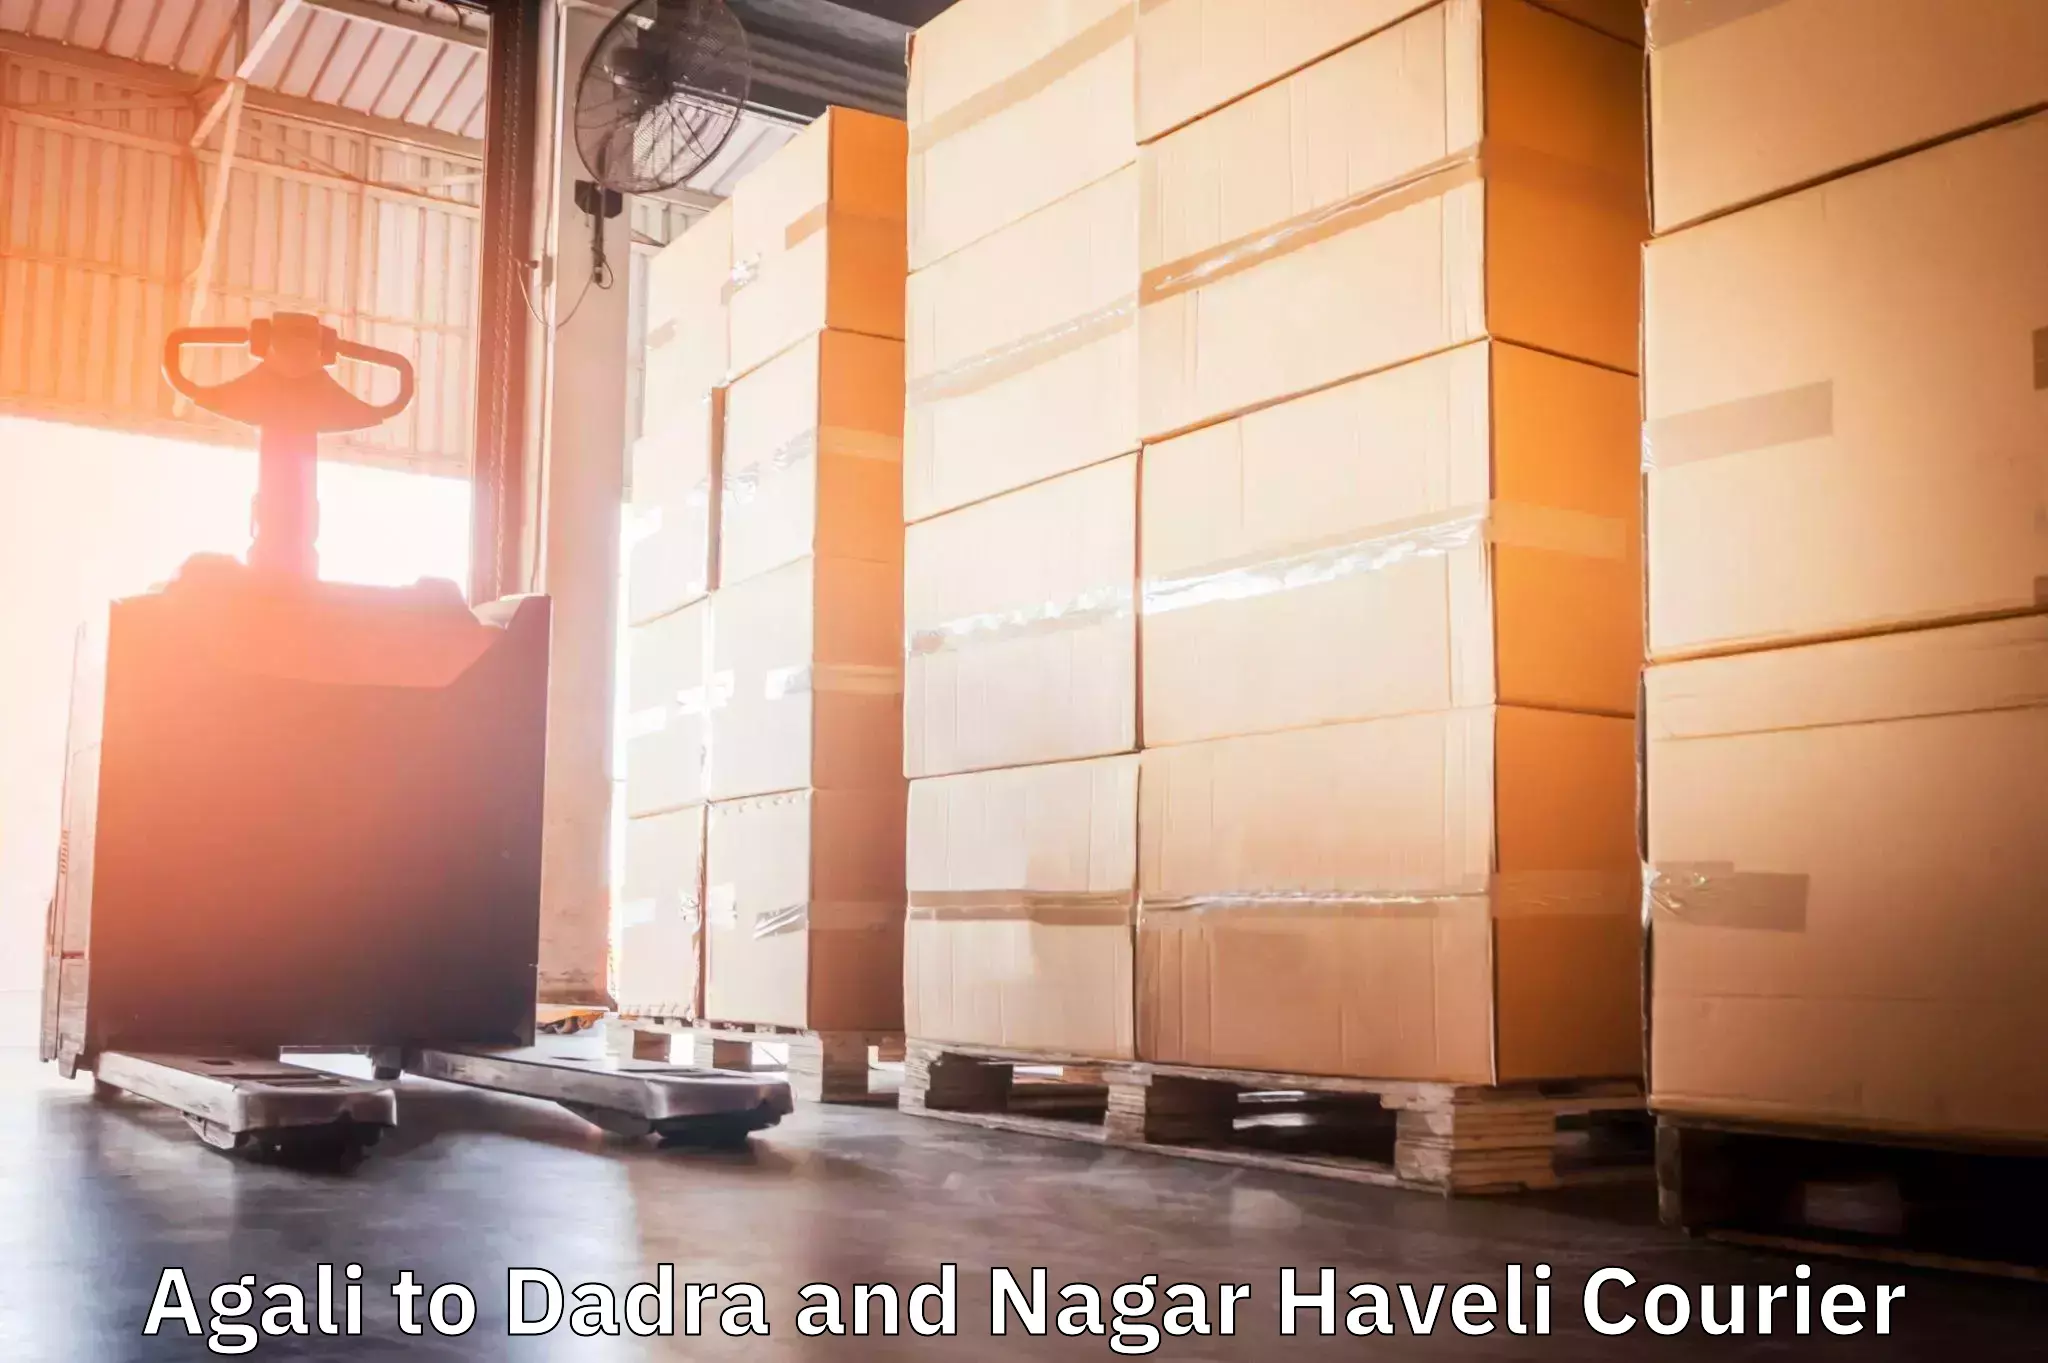 Sustainable shipping practices Agali to Dadra and Nagar Haveli